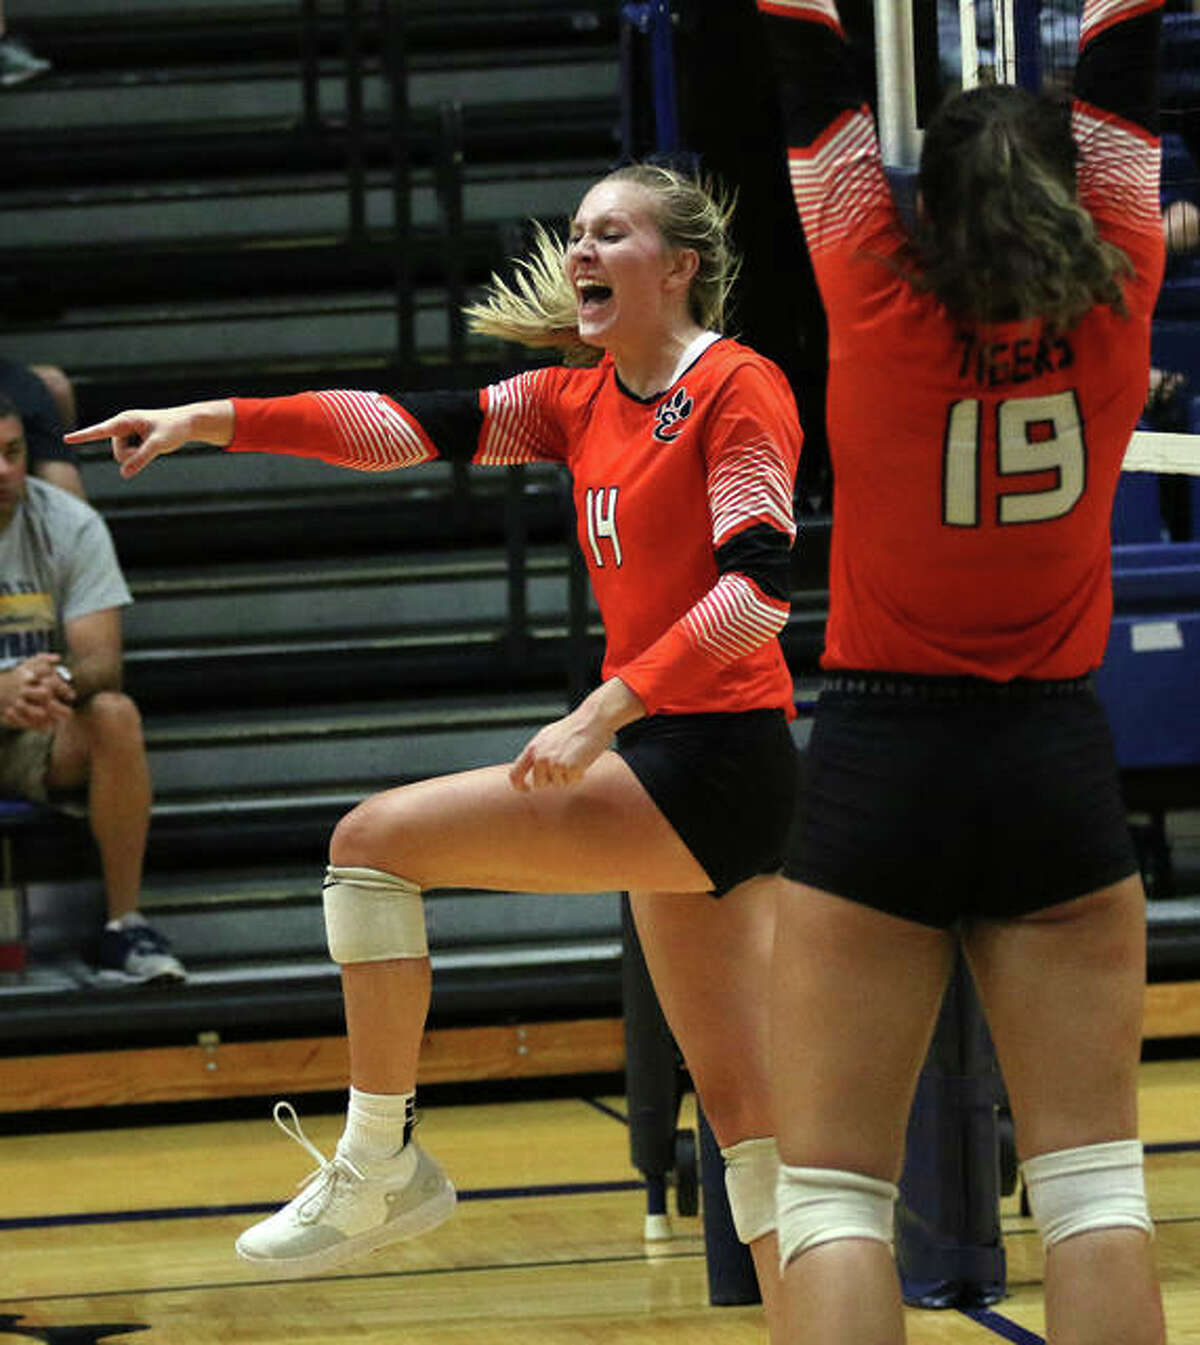 Edwardsville’s Maddie Isringhausen (left) celebrates one of her career-high 14 kills along with teammate Rhianna Huebner during the third set Tuesday at Panther Dome in O’Fallon.